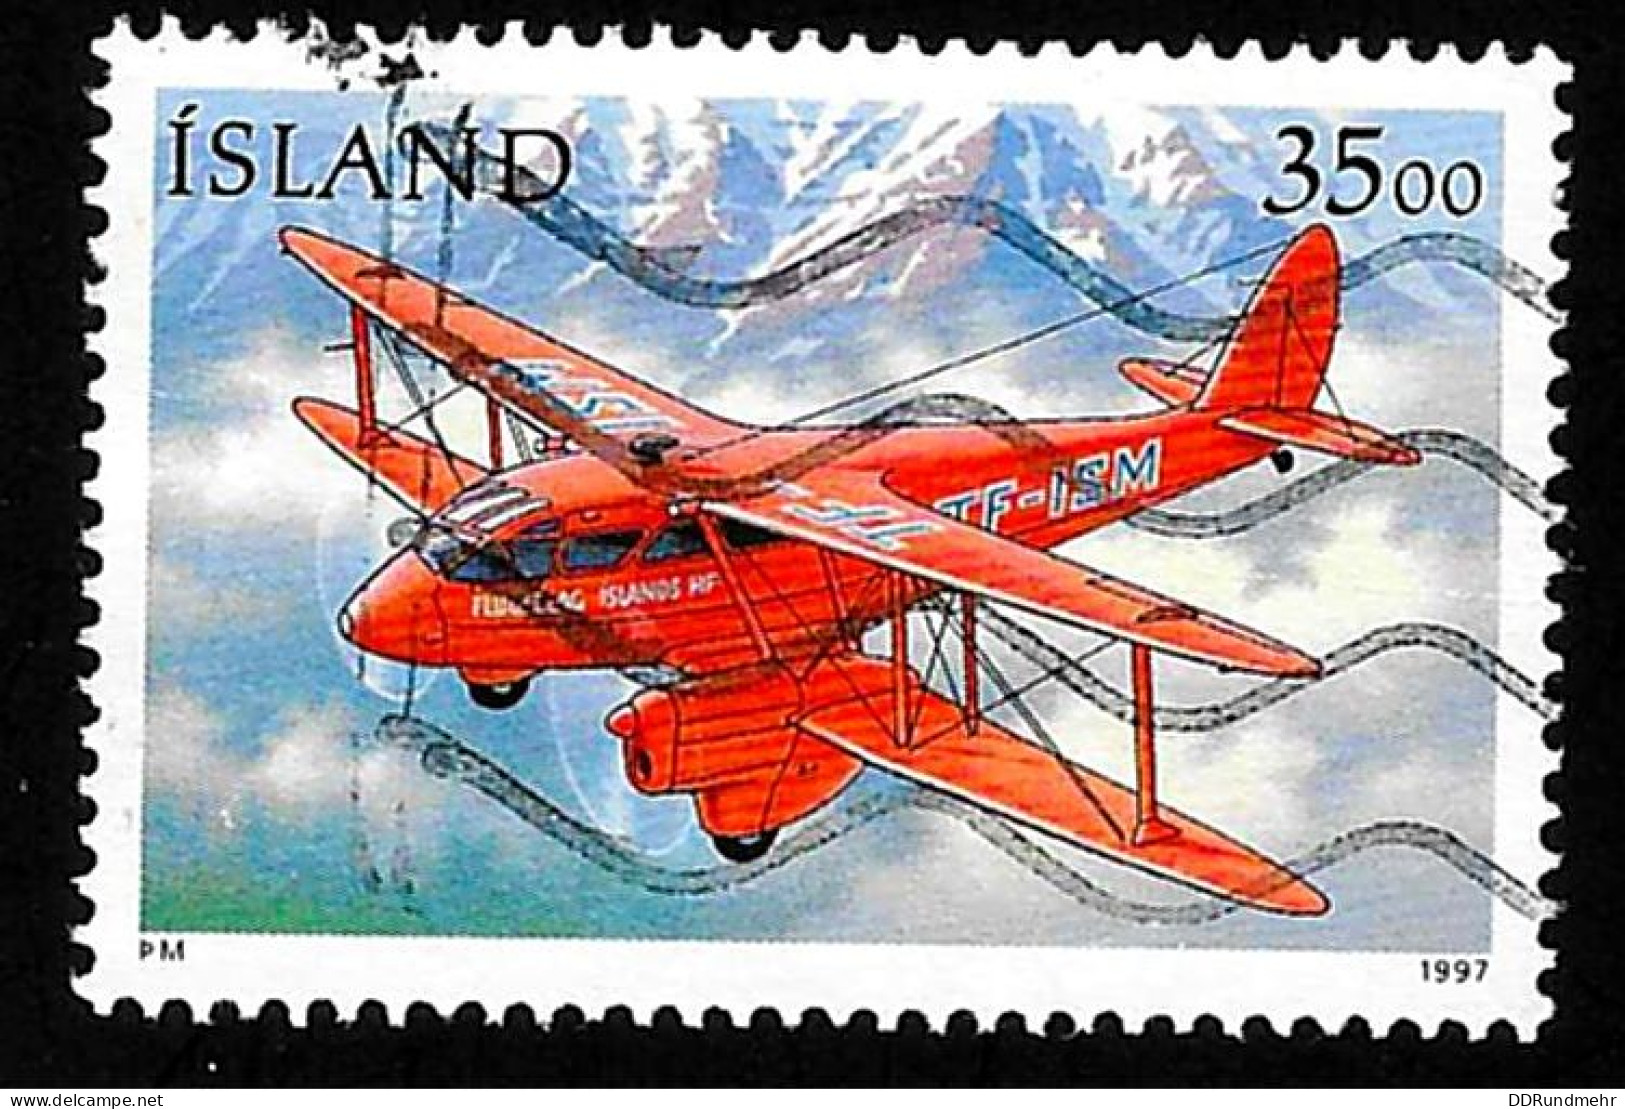 1997 Postal Aircrafts  Michel IS 866 Stamp Number IS 838 Stanley Gibbons IS 879 Used - Used Stamps